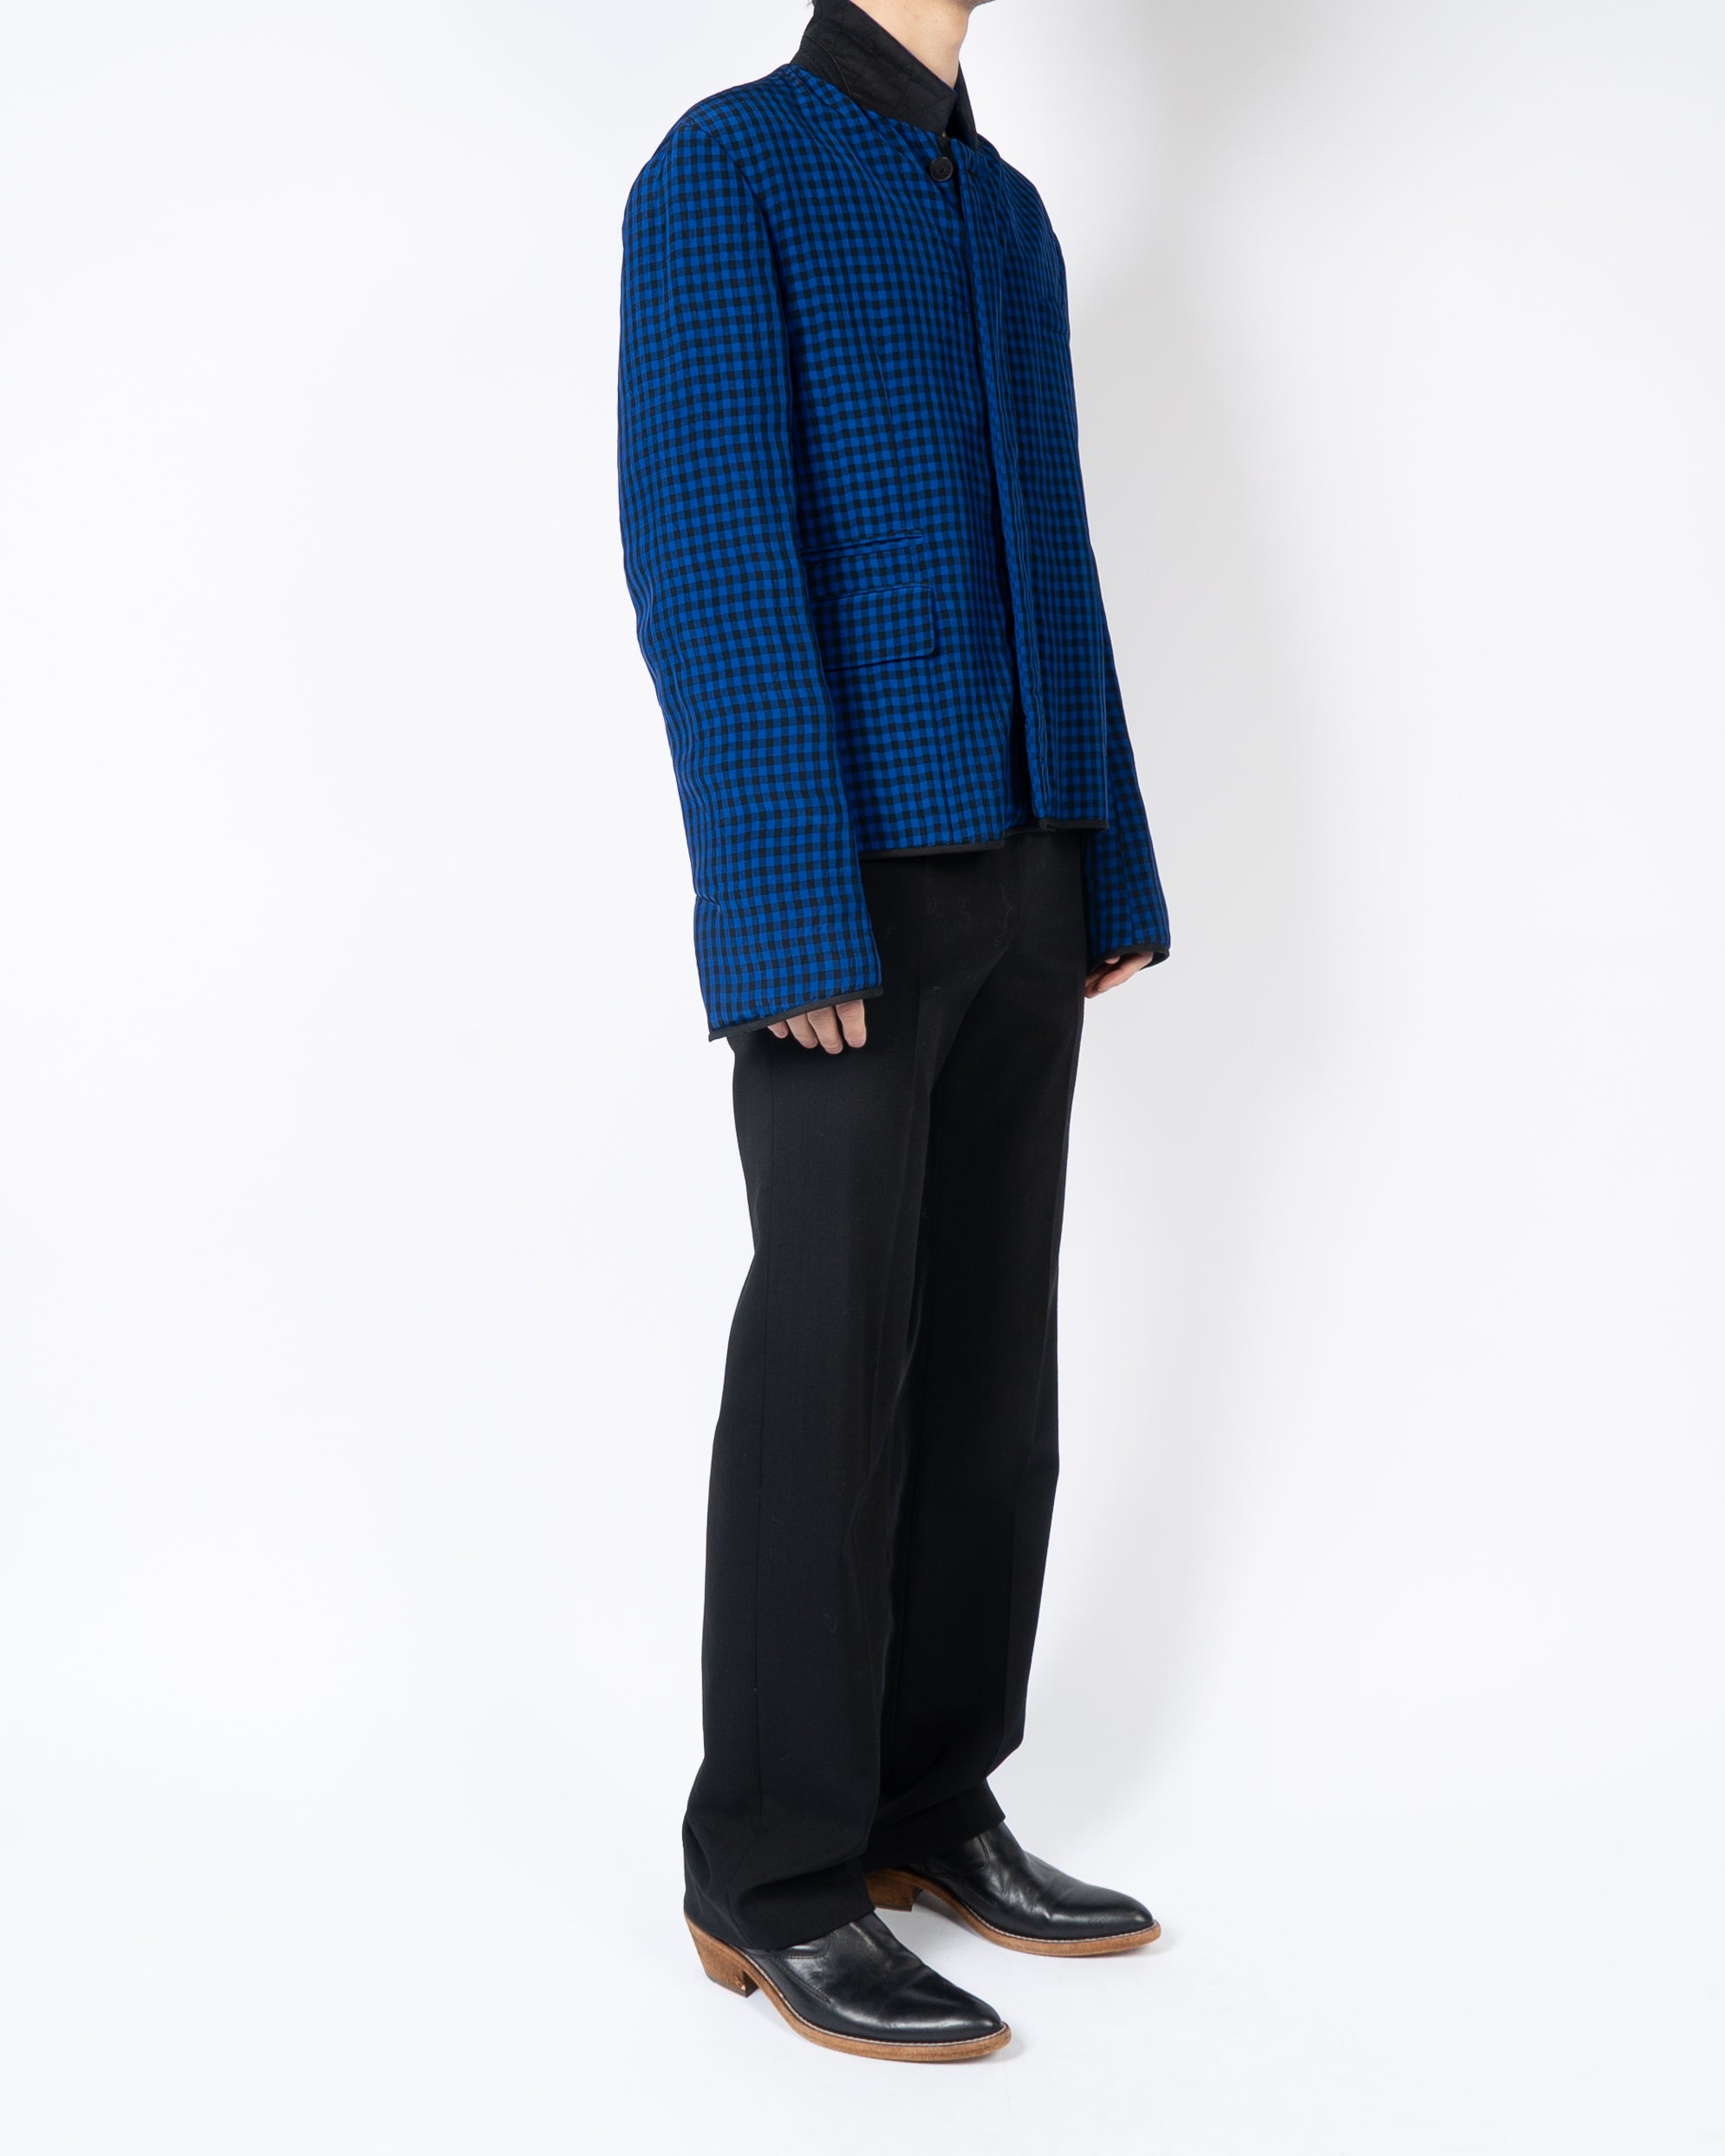 SS19 Checked Blue Padded Silk Jacket